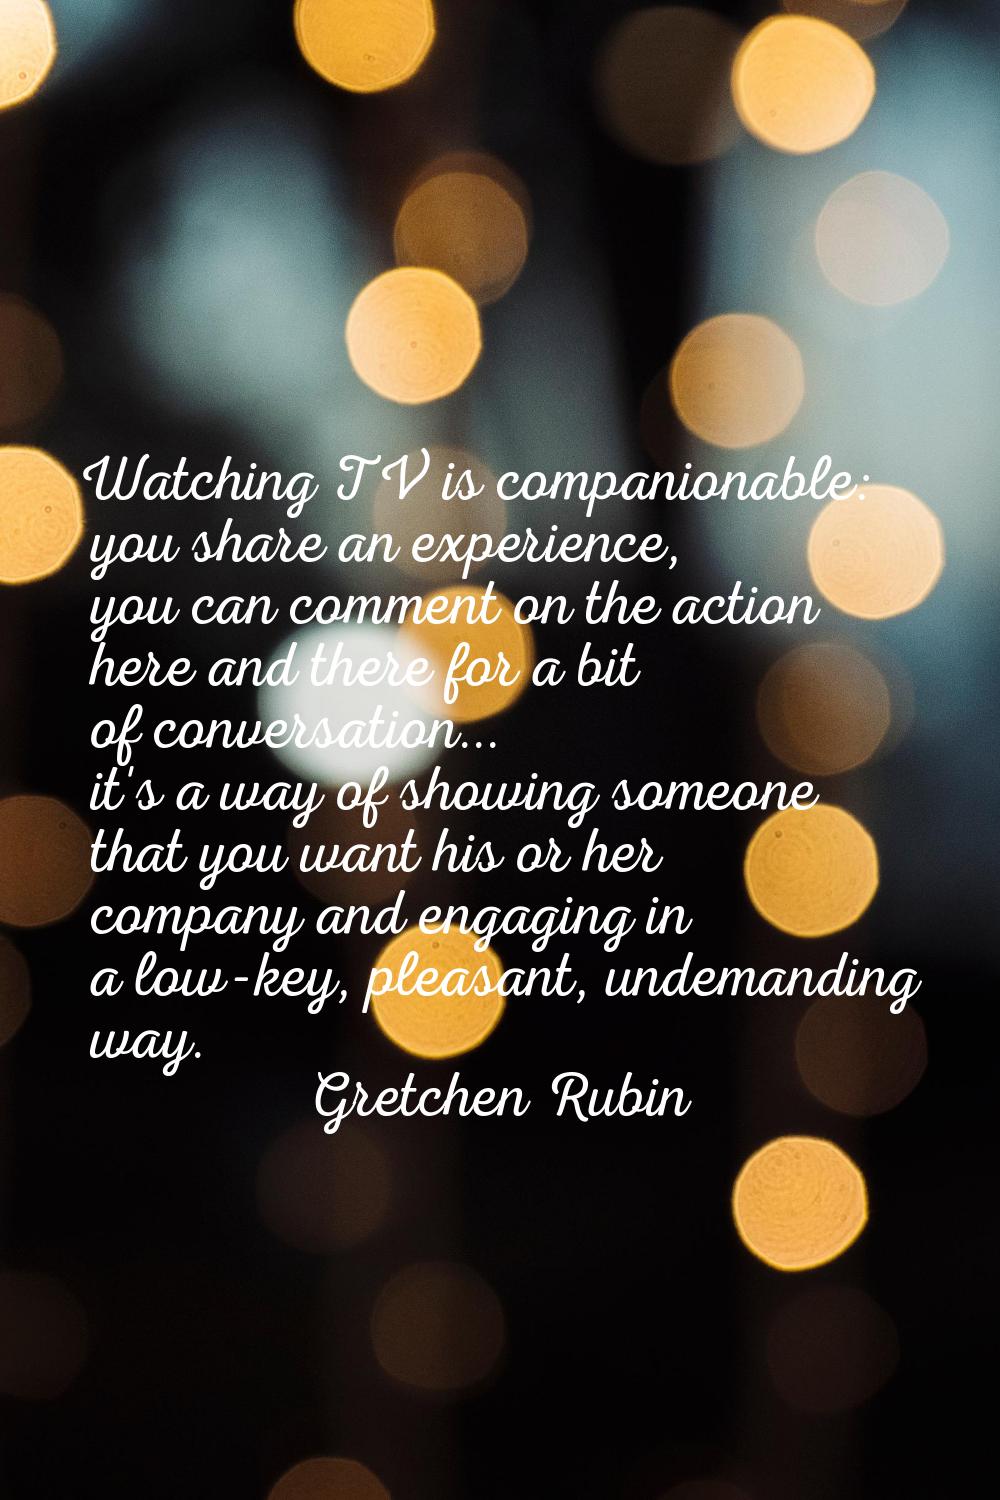 Watching TV is companionable: you share an experience, you can comment on the action here and there